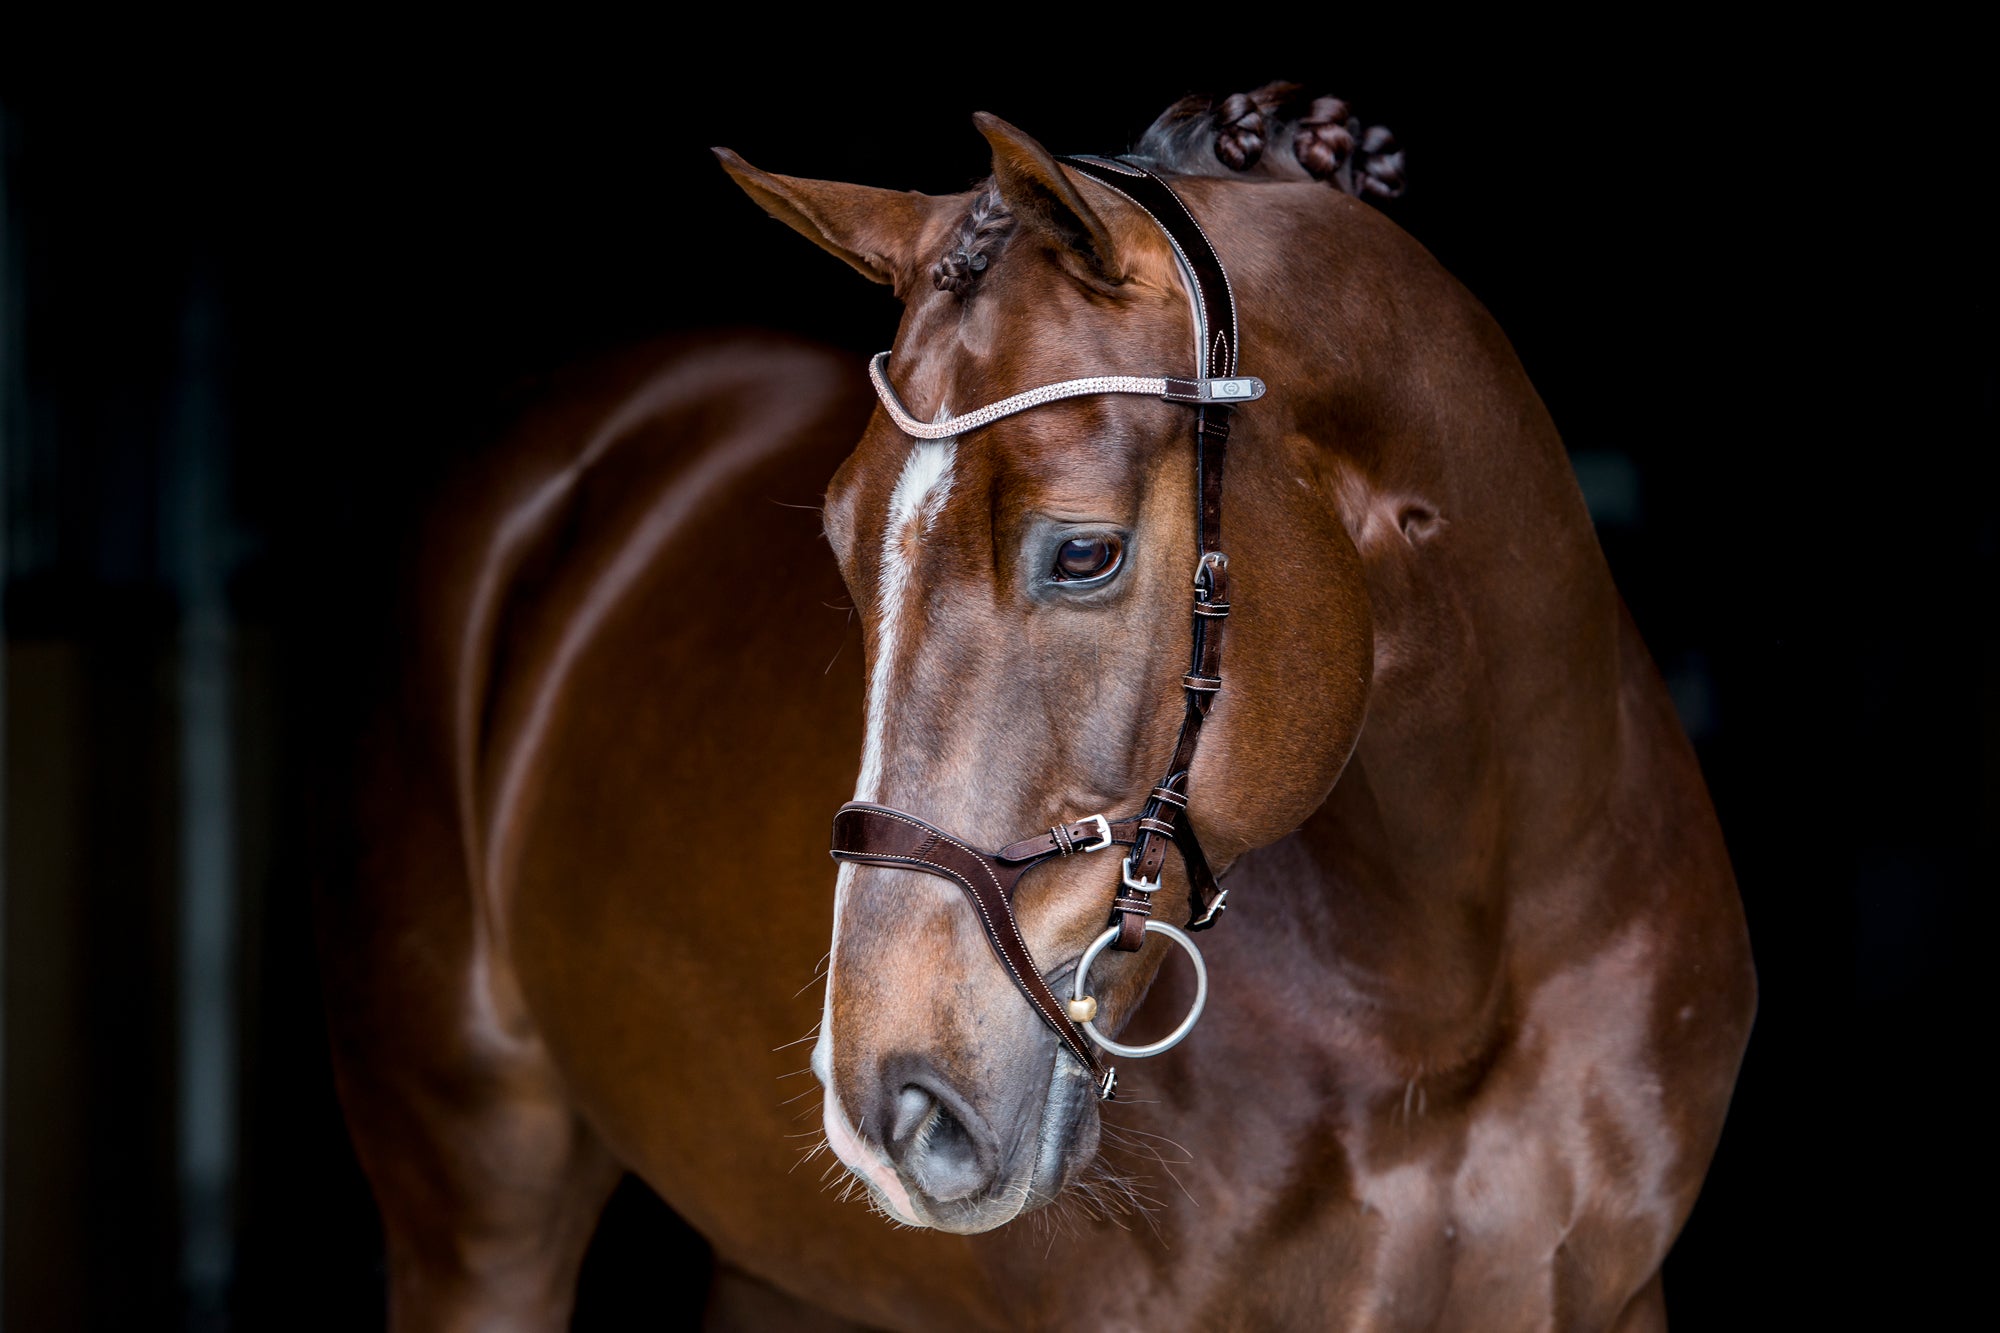 The adjustable noseband gives the rider an opportunity to choose how much pressure to apply on the nose. It helps the horse to accept the bit and is a perfect bridle for both the young horse who's still learning to communicate with the rider as well as for the type of horse who tries to avoid contact with the rider's hand and rather folds in the neck too much.